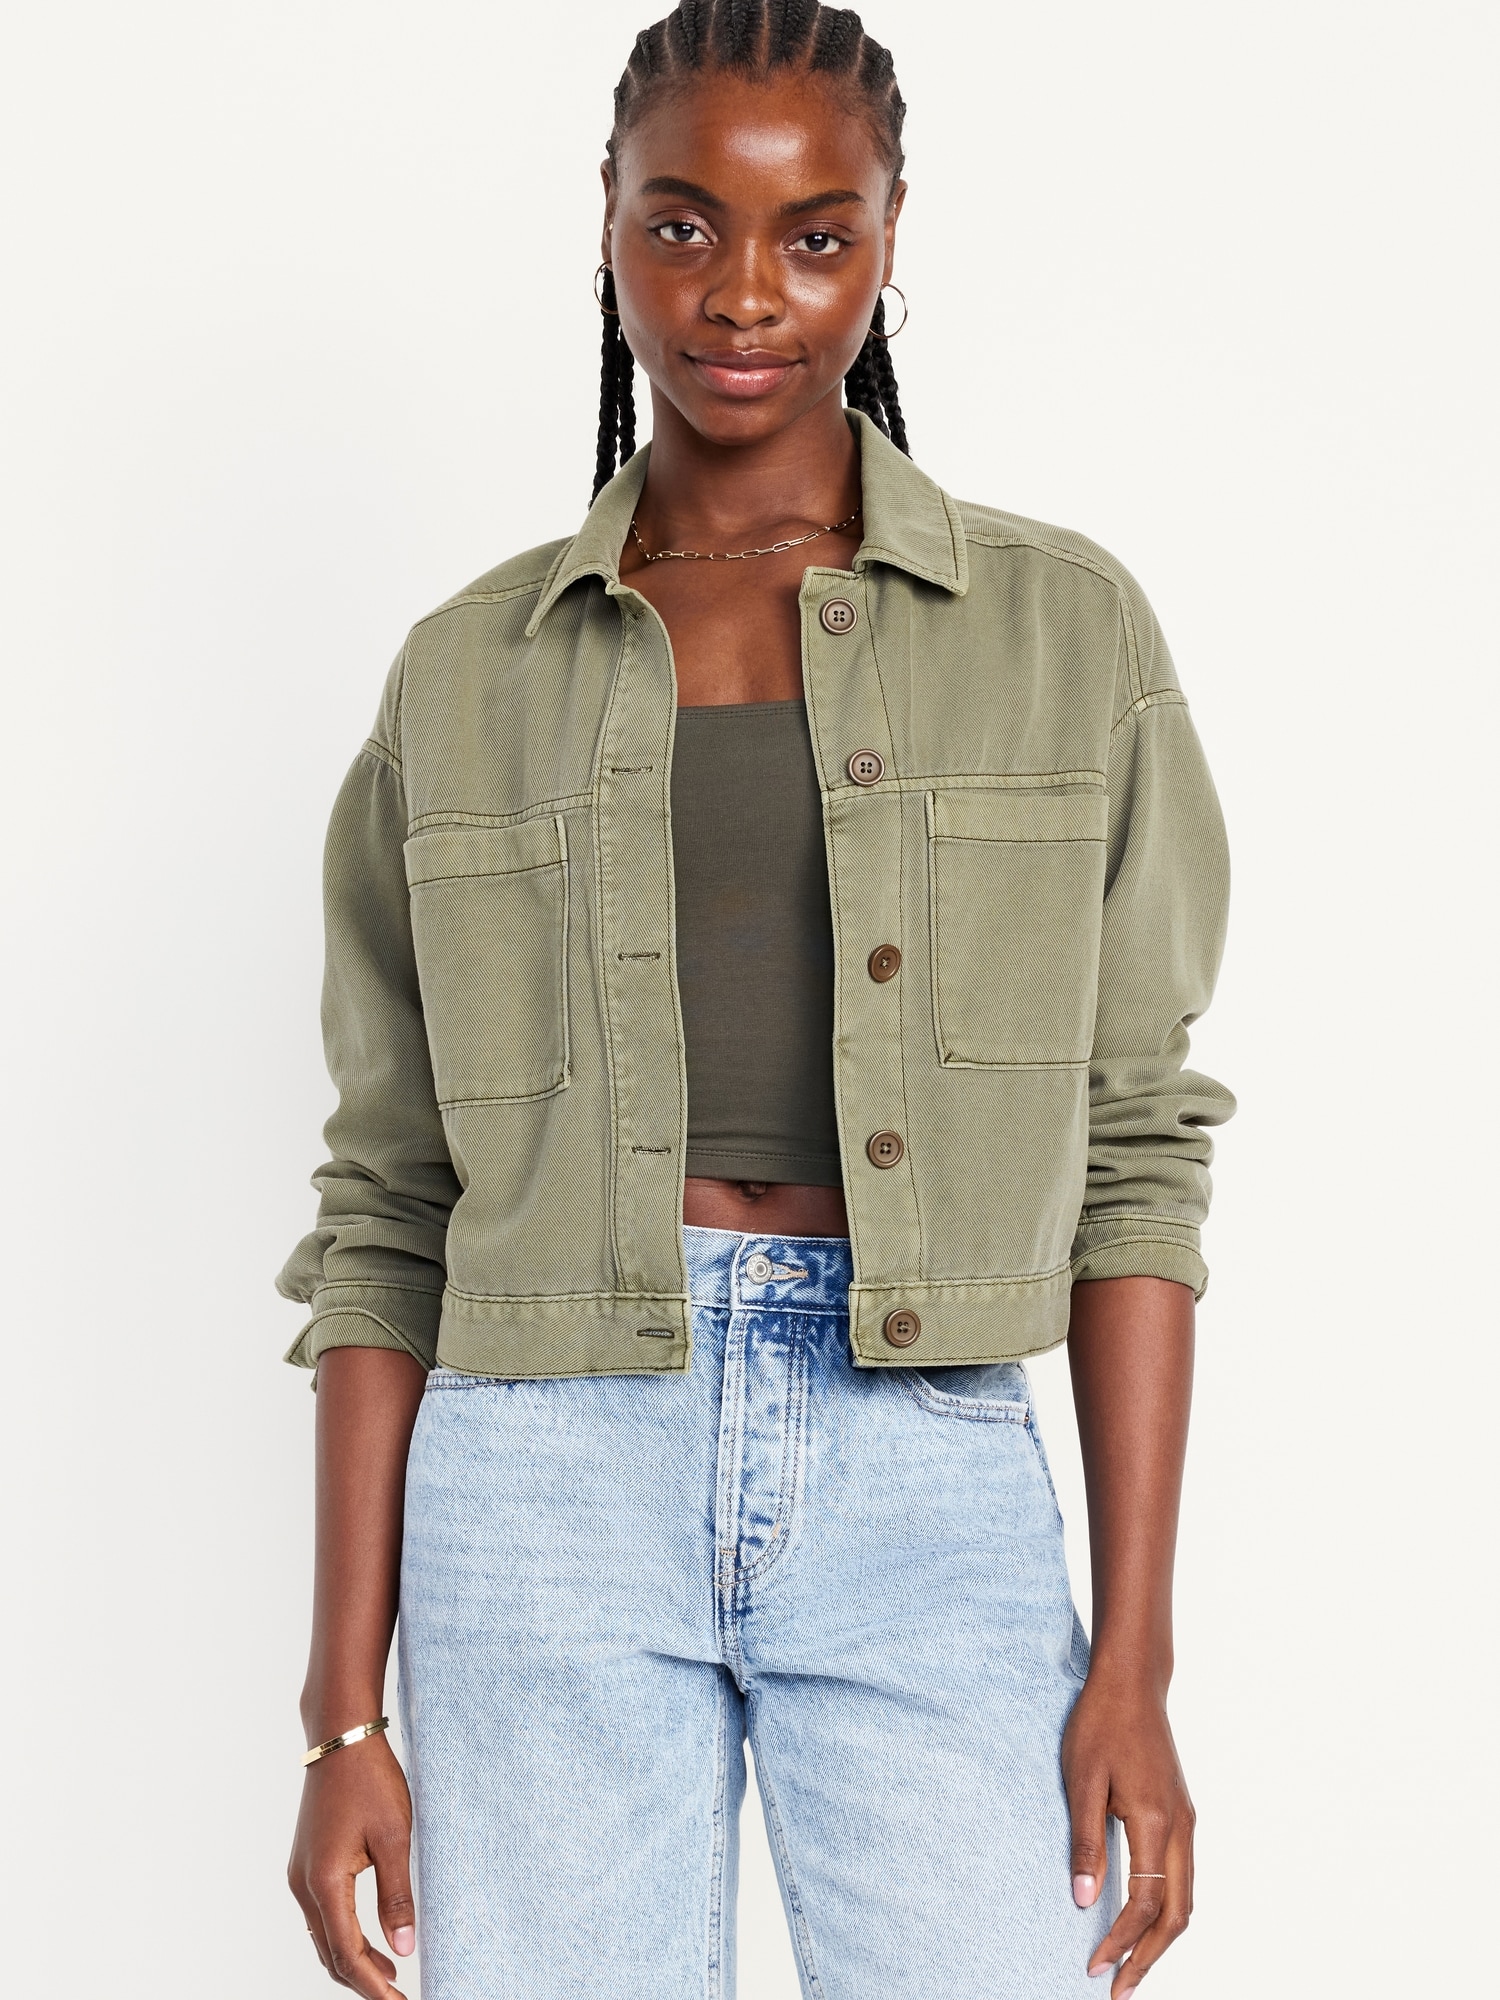 Women's Cropped Jackets, Short & Cropped Coats